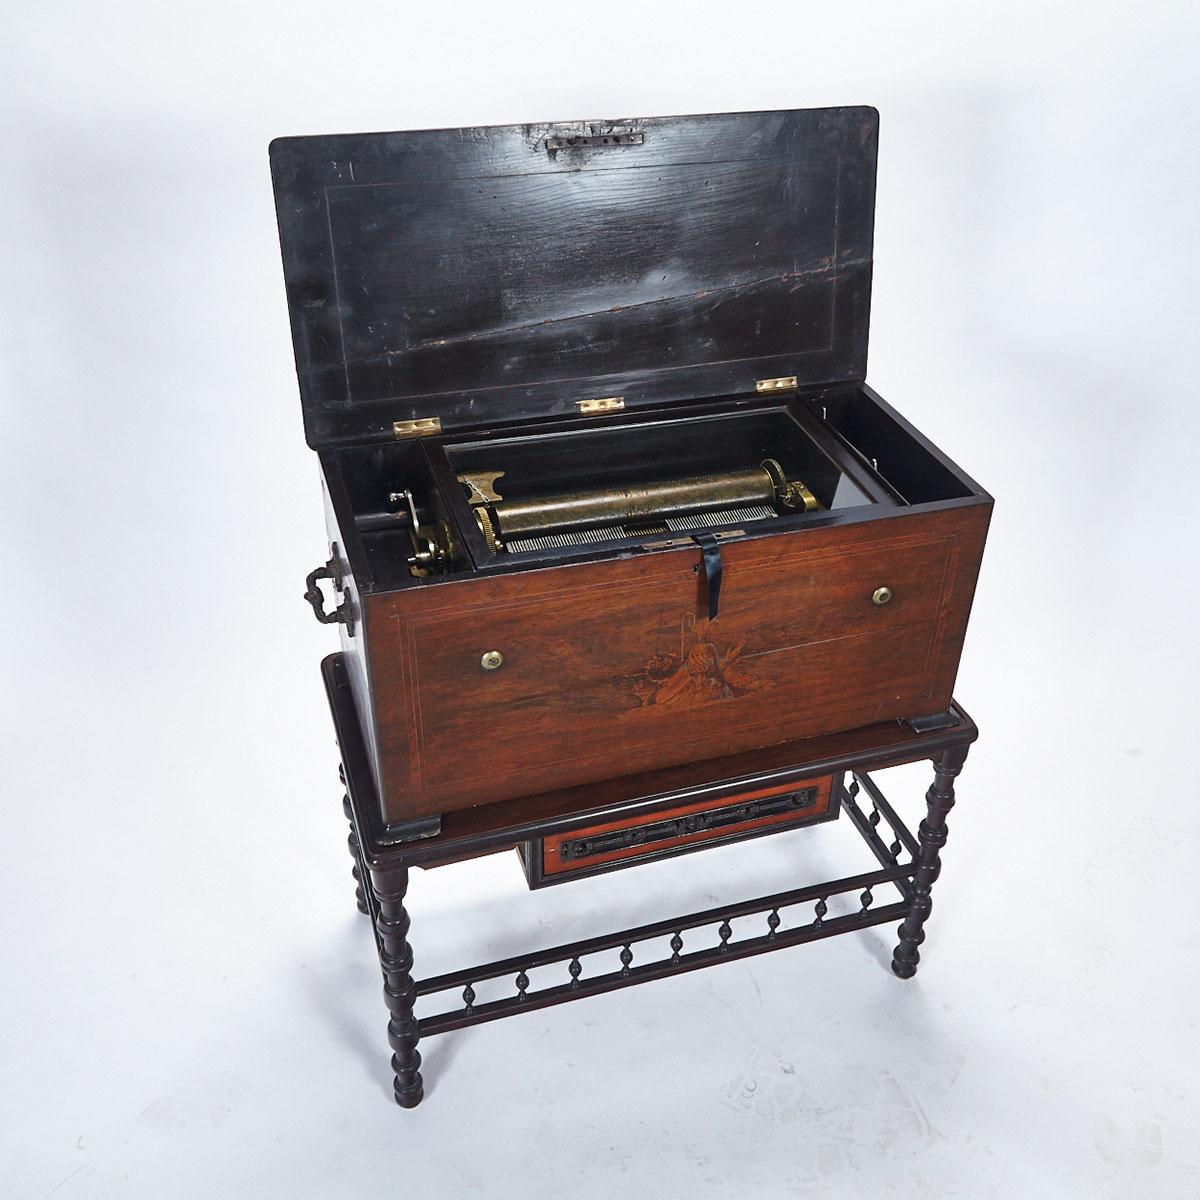 Large Swiss for the Asian Market Combination Organ Music Box on Stand, c.1890